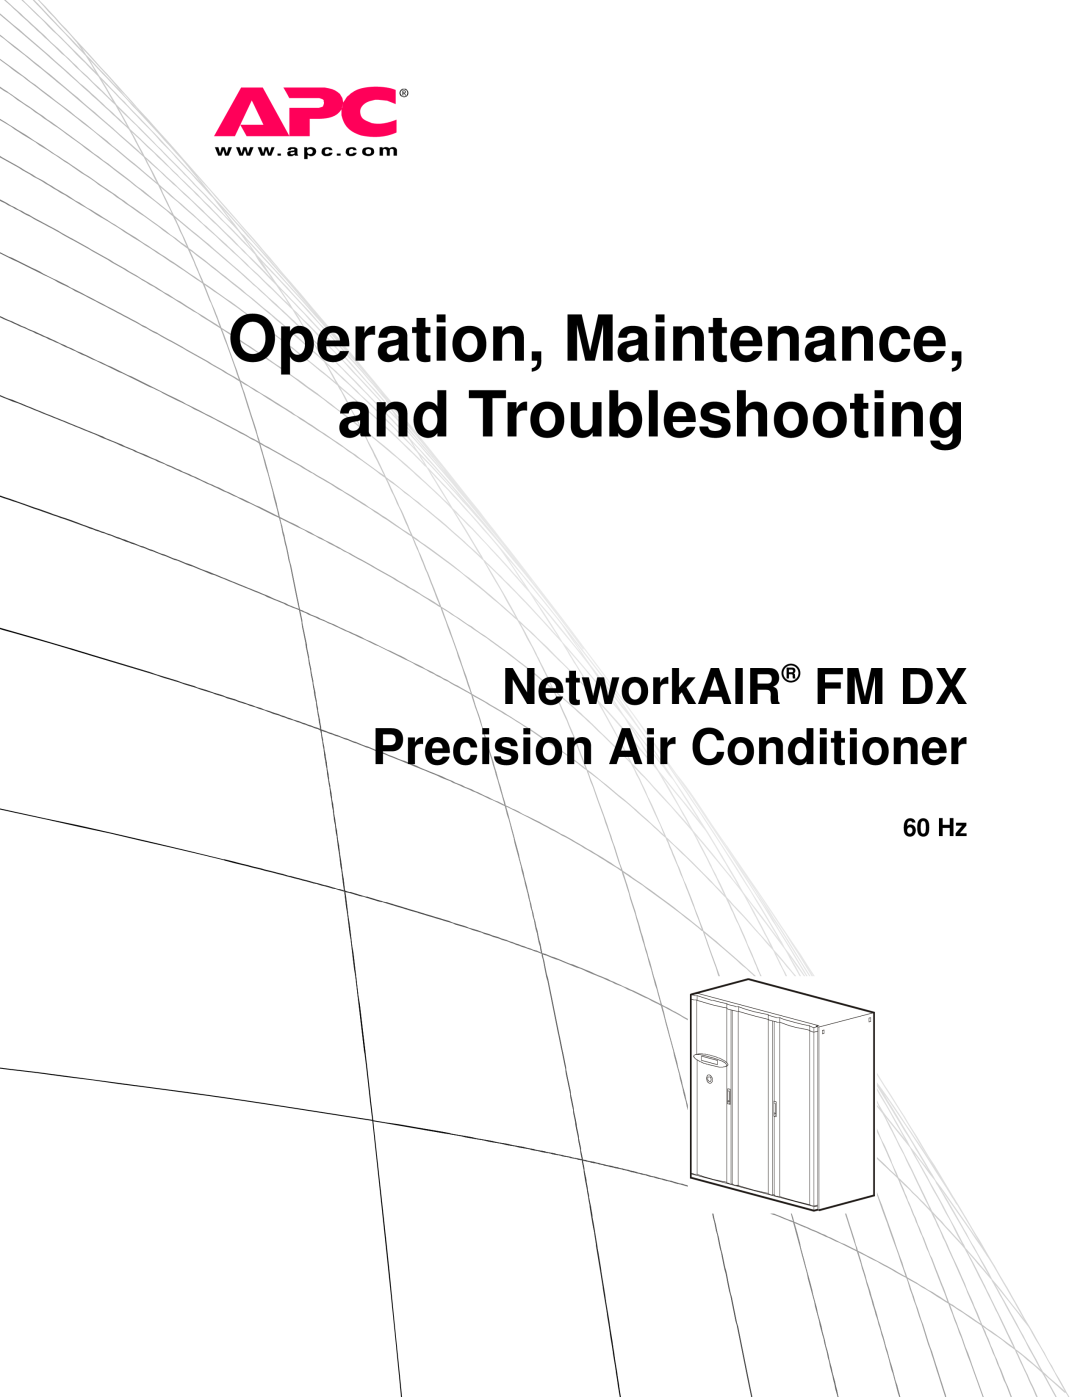 American Power Conversion FM, DX manual 60 Hz, Operation, Maintenance, and Troubleshooting 